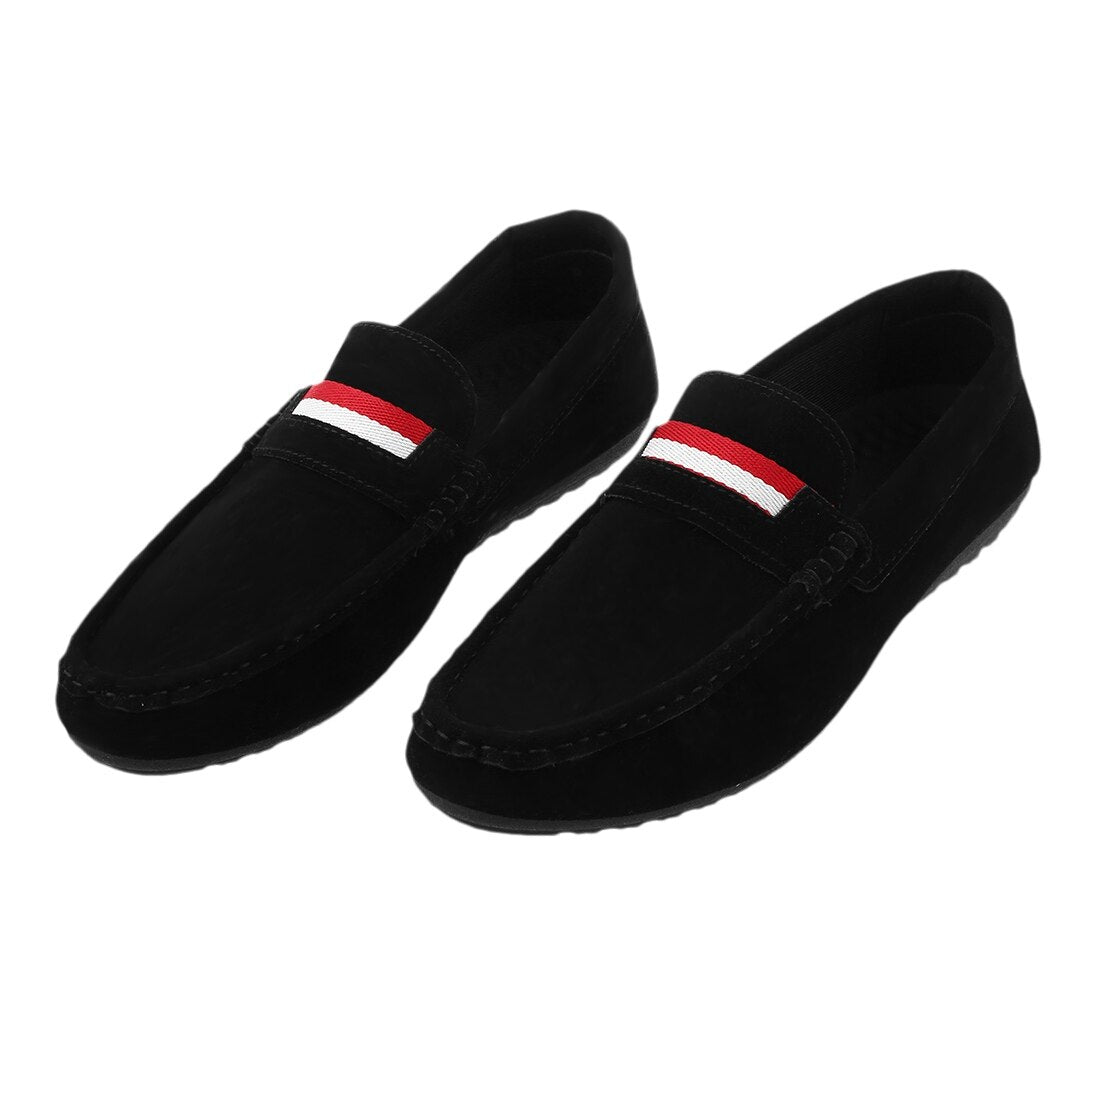 New Spring and Autumn fashion mens shoes Korean suede leather casual males flats soft breathable loafers - ebowsos